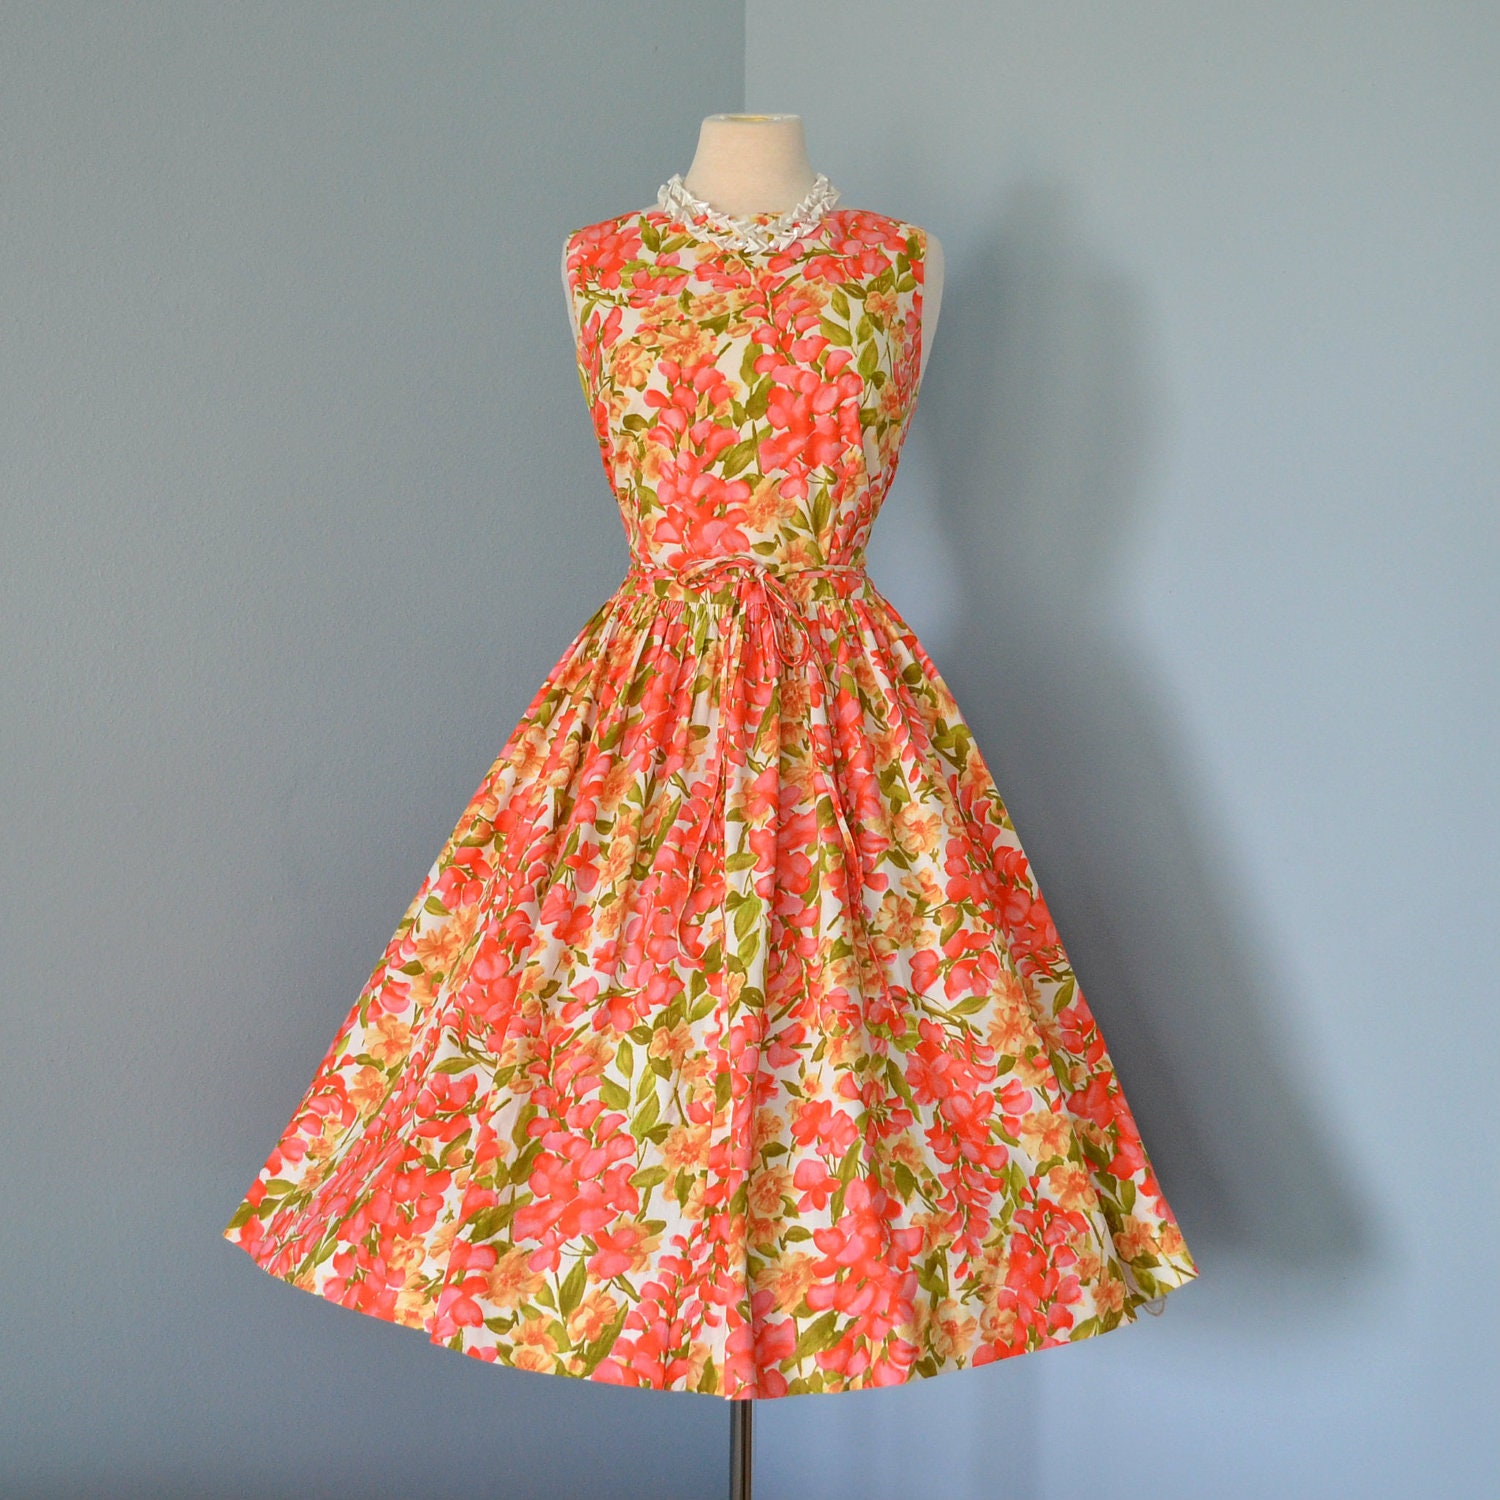 Vintage 1950s Sundress...Darling JERRY GILDEN Cotton by deomas